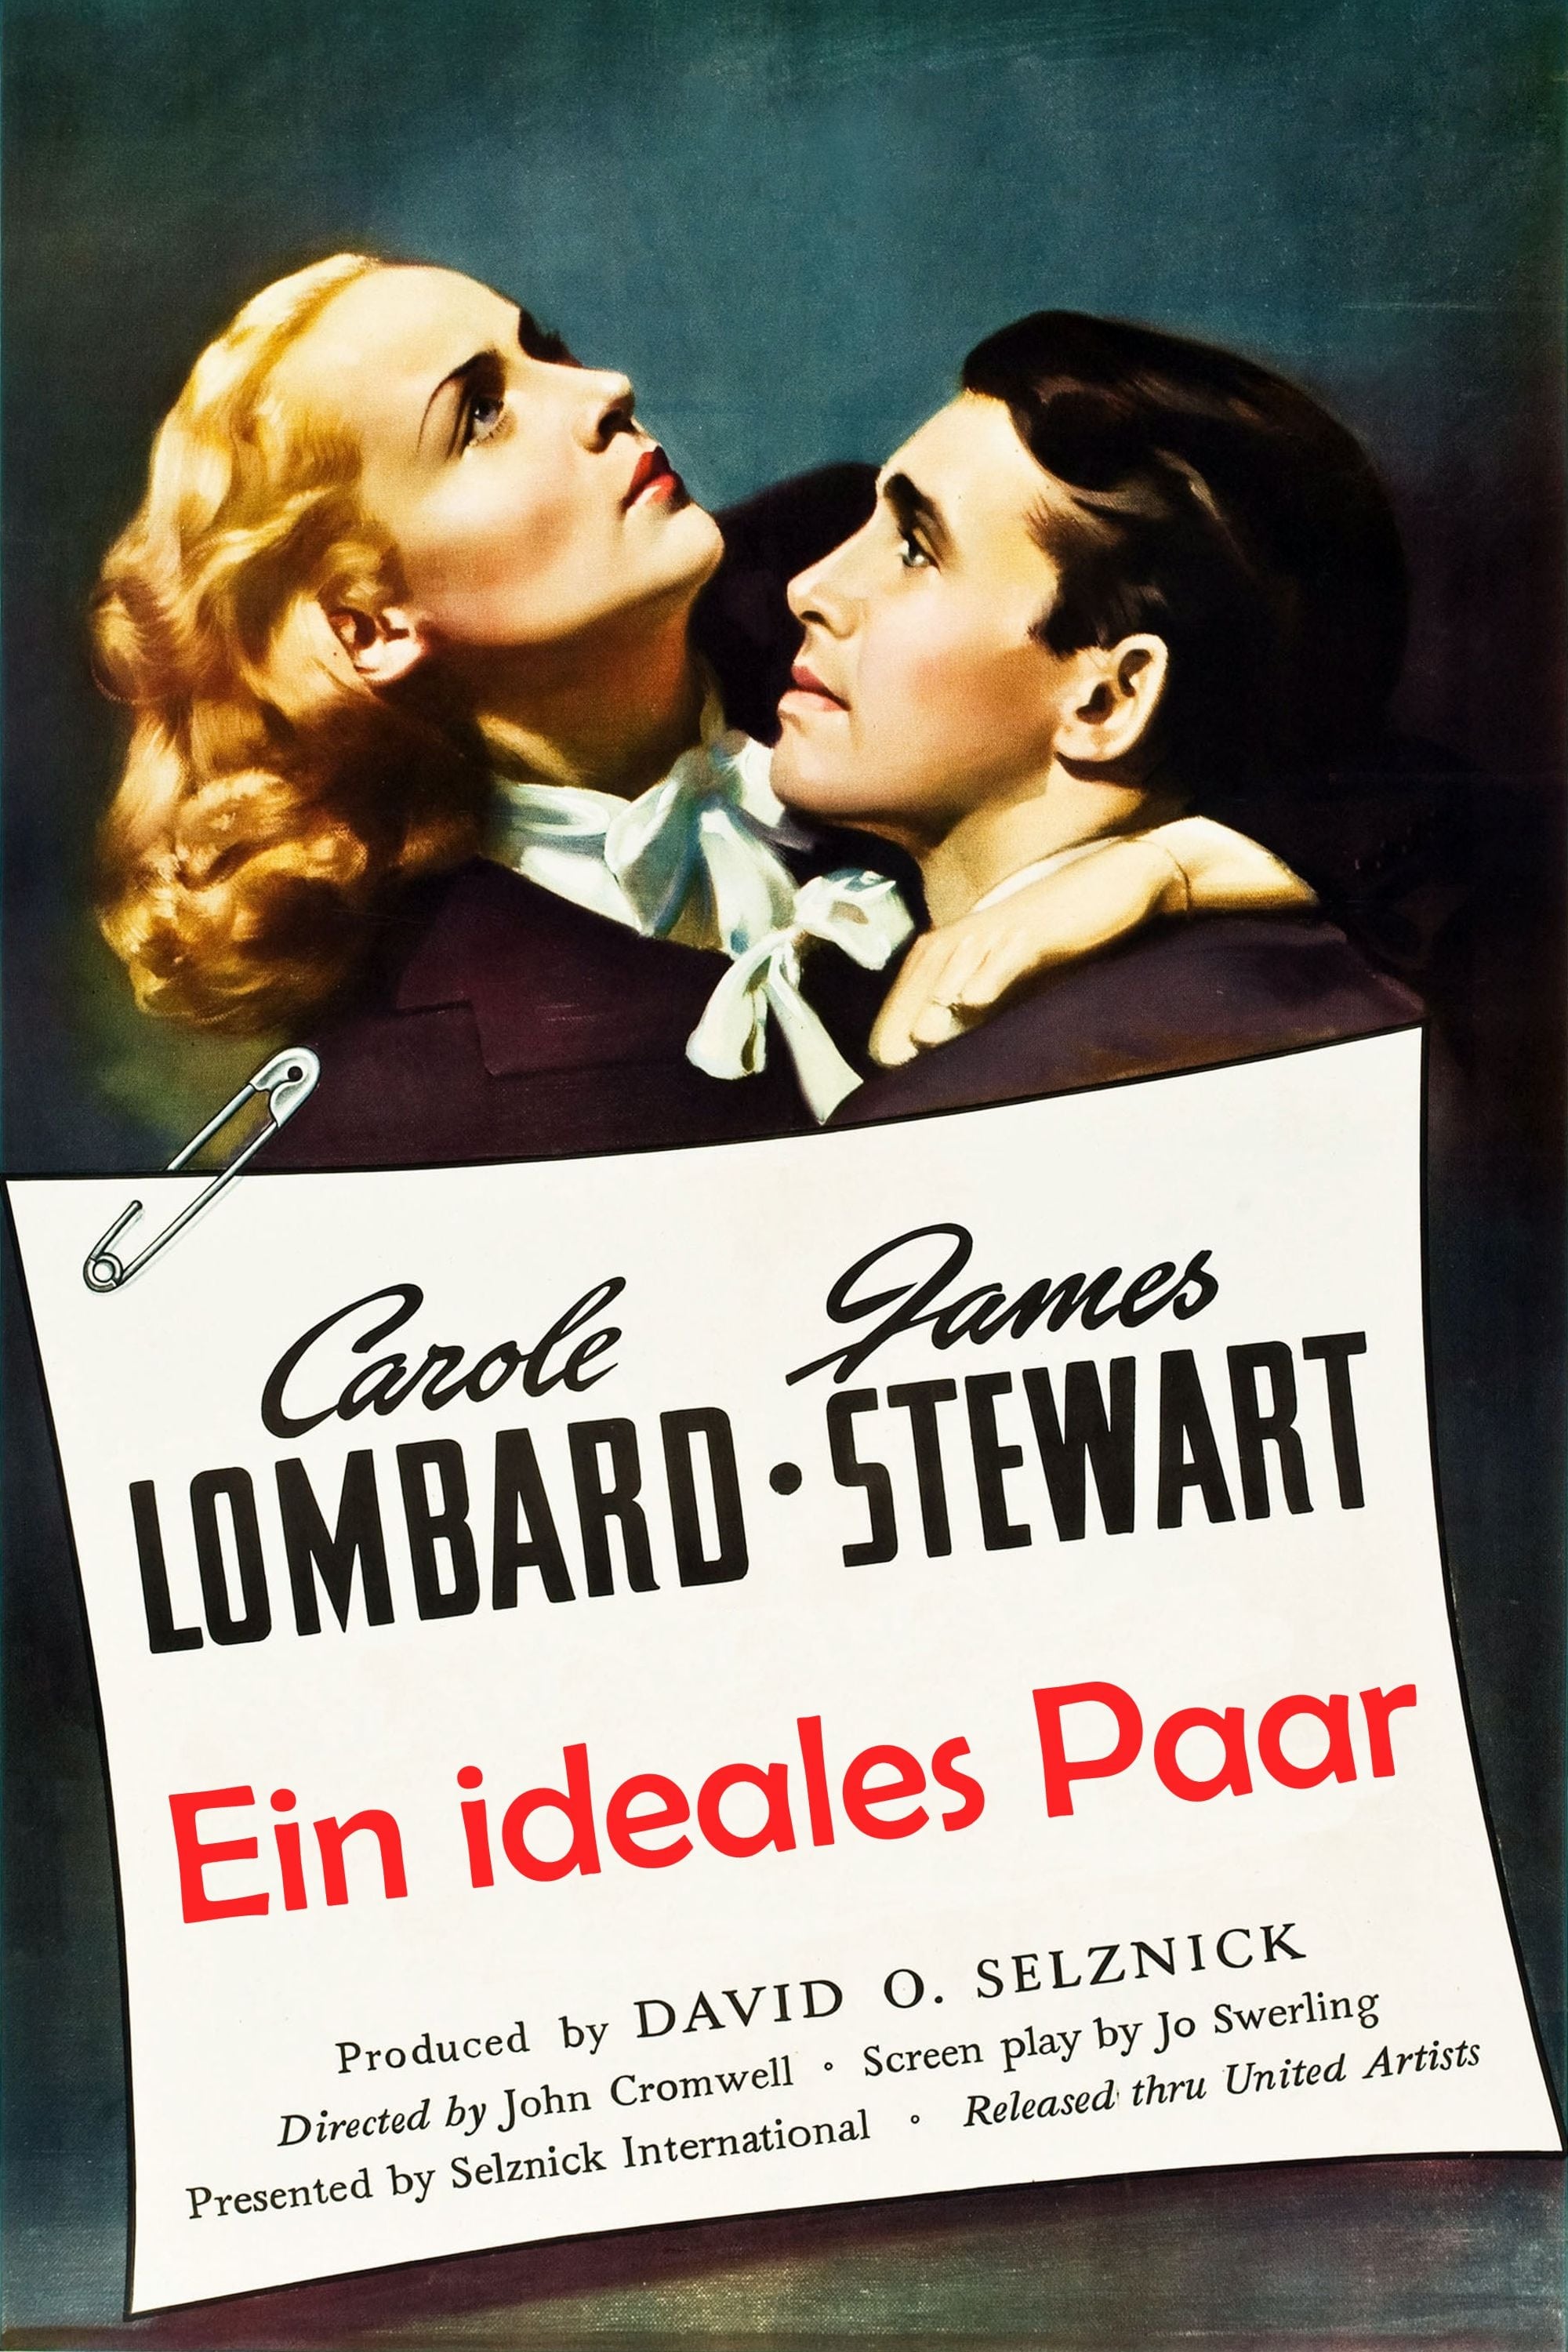 Made for Each Other (1939)